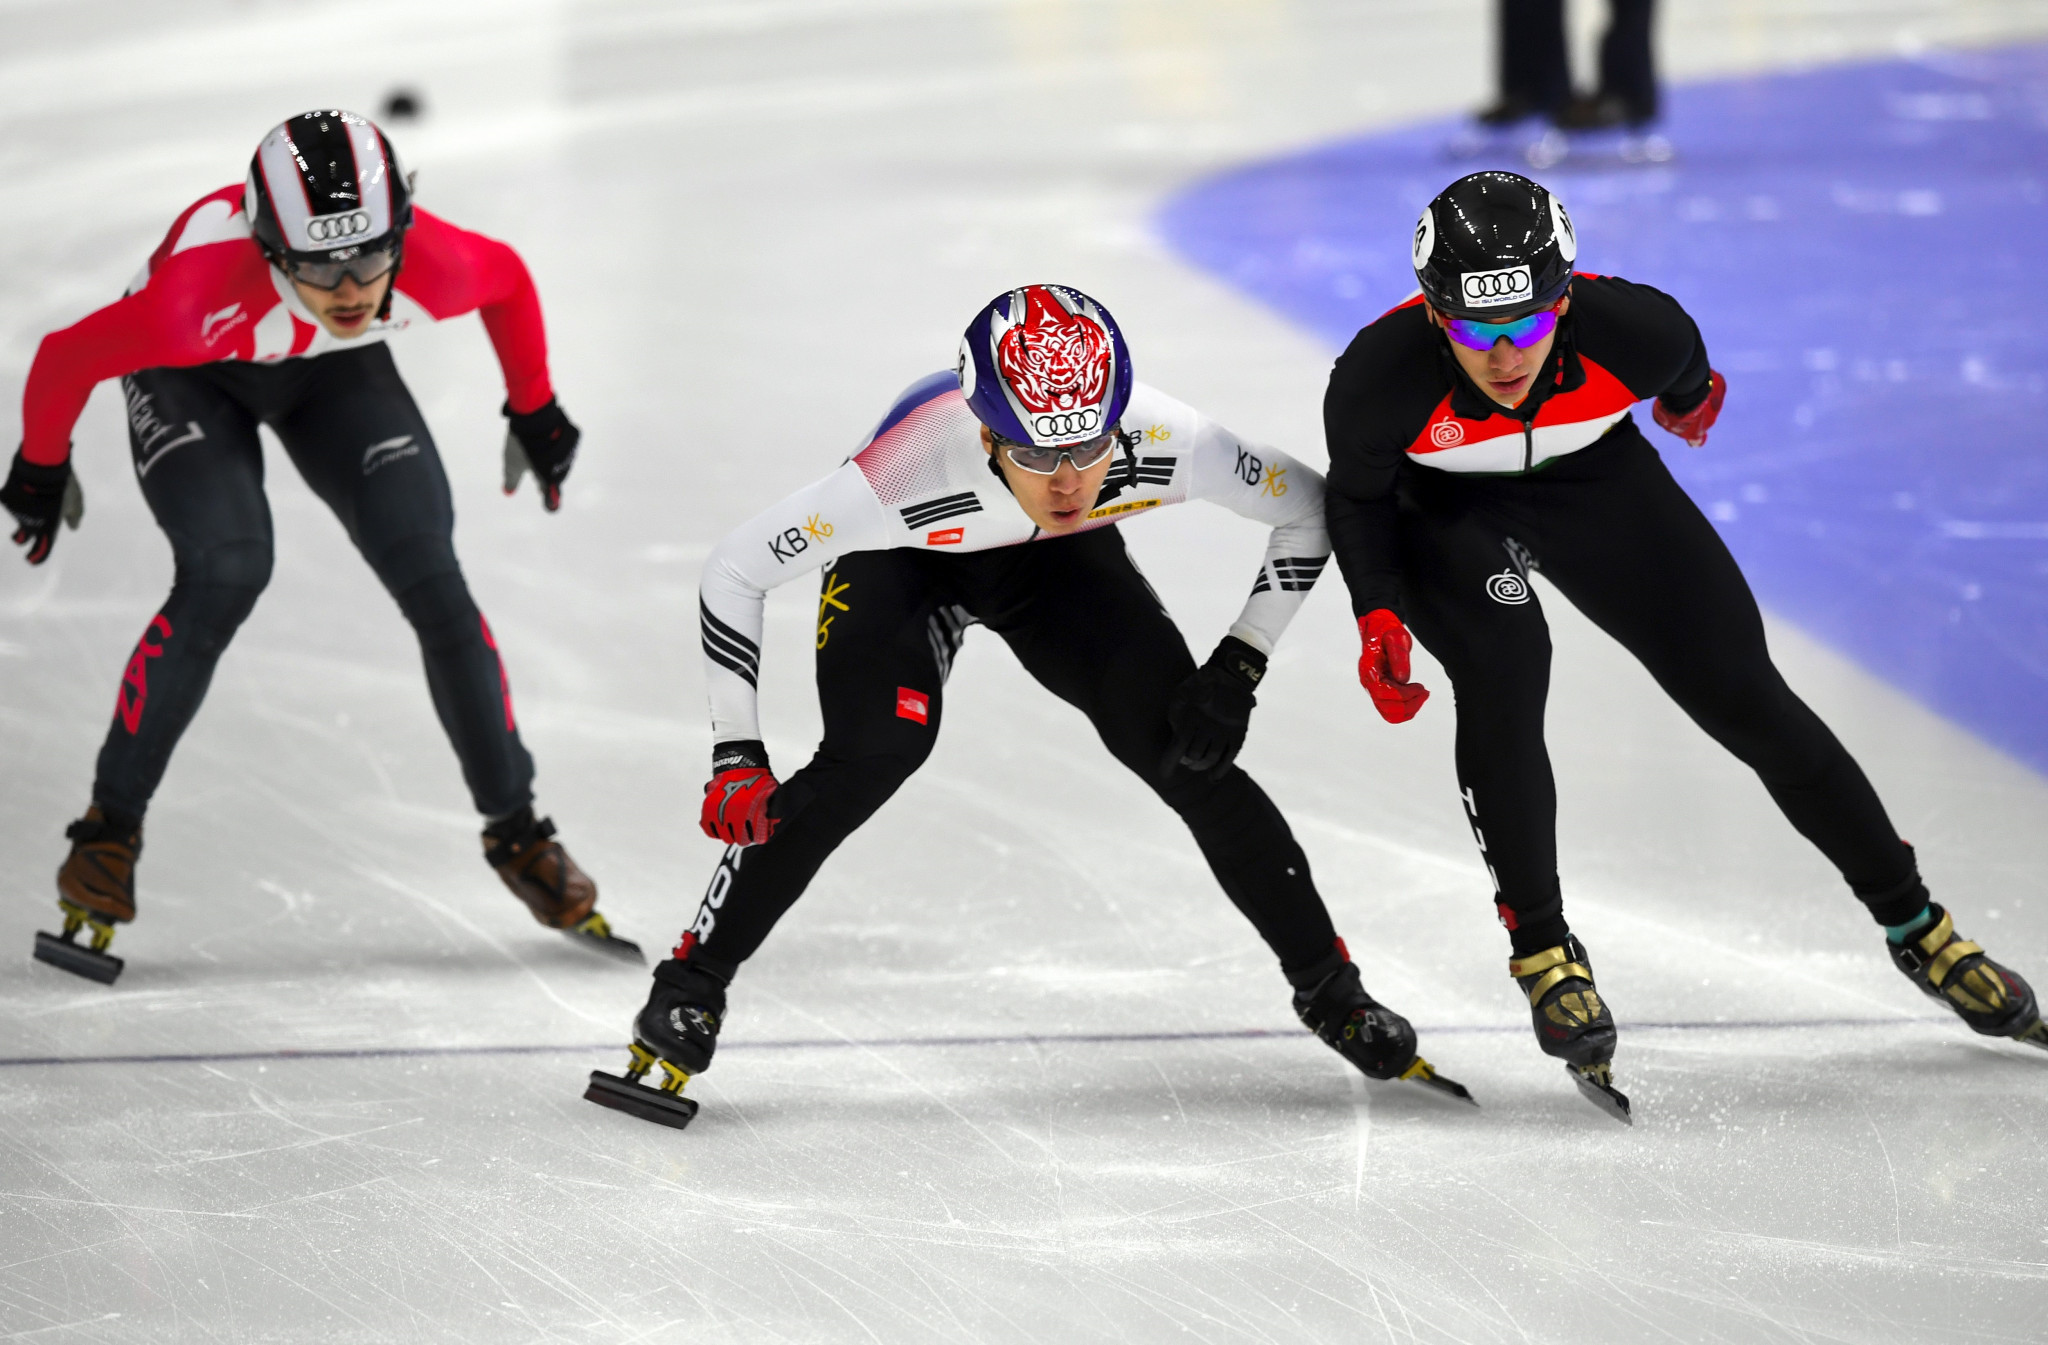 Shaolin Sandor Liu, right, of Hungary and Hwang Dae-Heon, centre, of South Korea compete during the men's 1000 metre final at the ISU World Cup Short Track Speed Skating in Seoul ©Getty Images